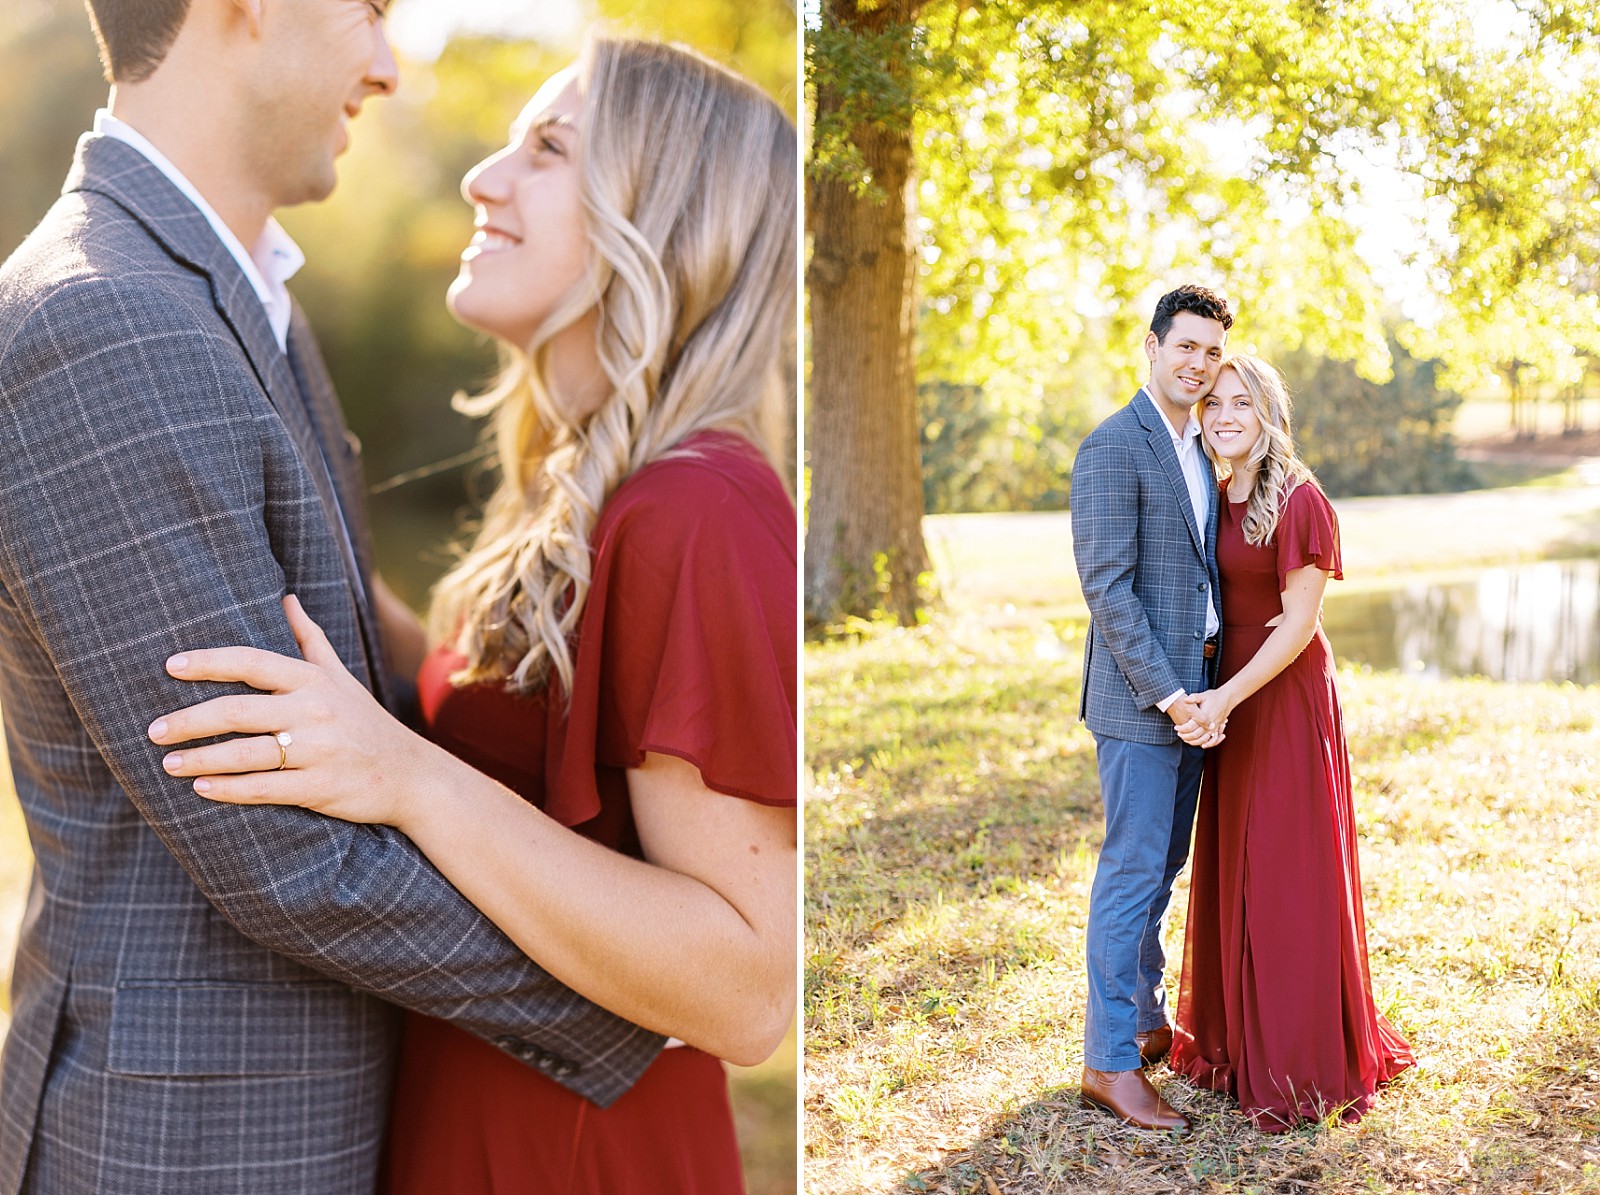 Tweed sports coat and red maxi dress for  fall engagement session | Raleigh NC wedding photographer